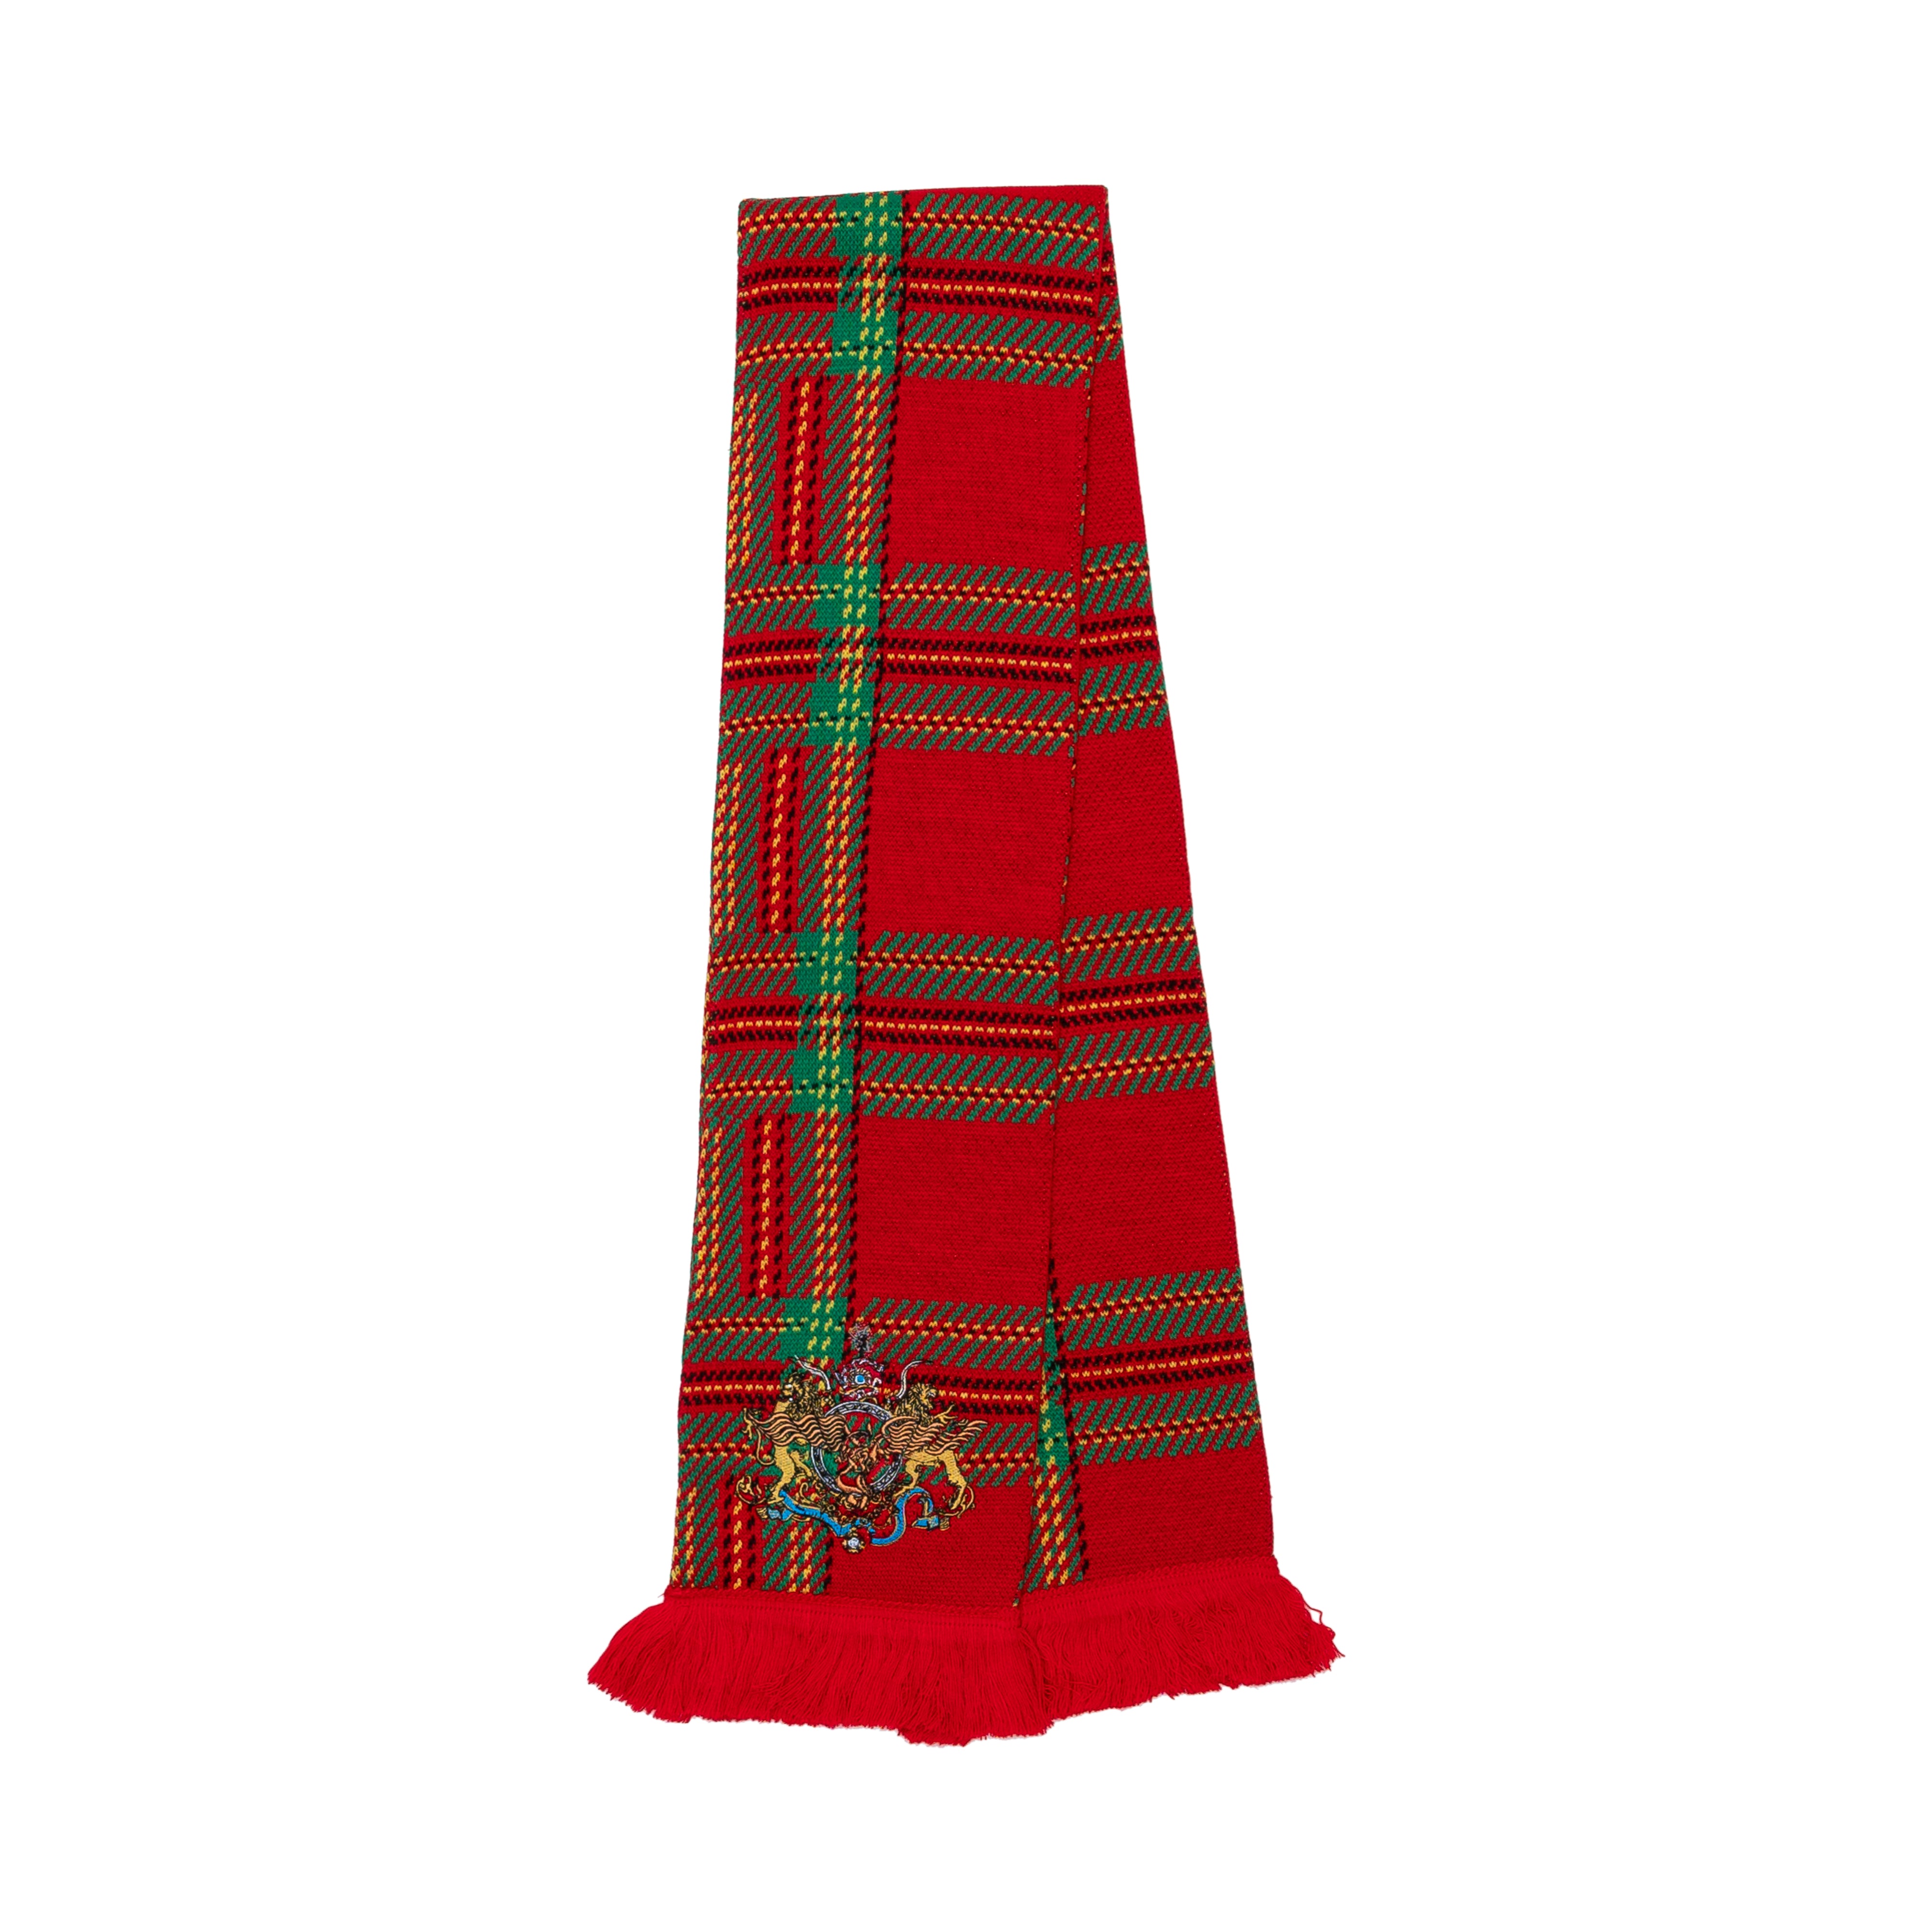 liberal youth ministry scarf